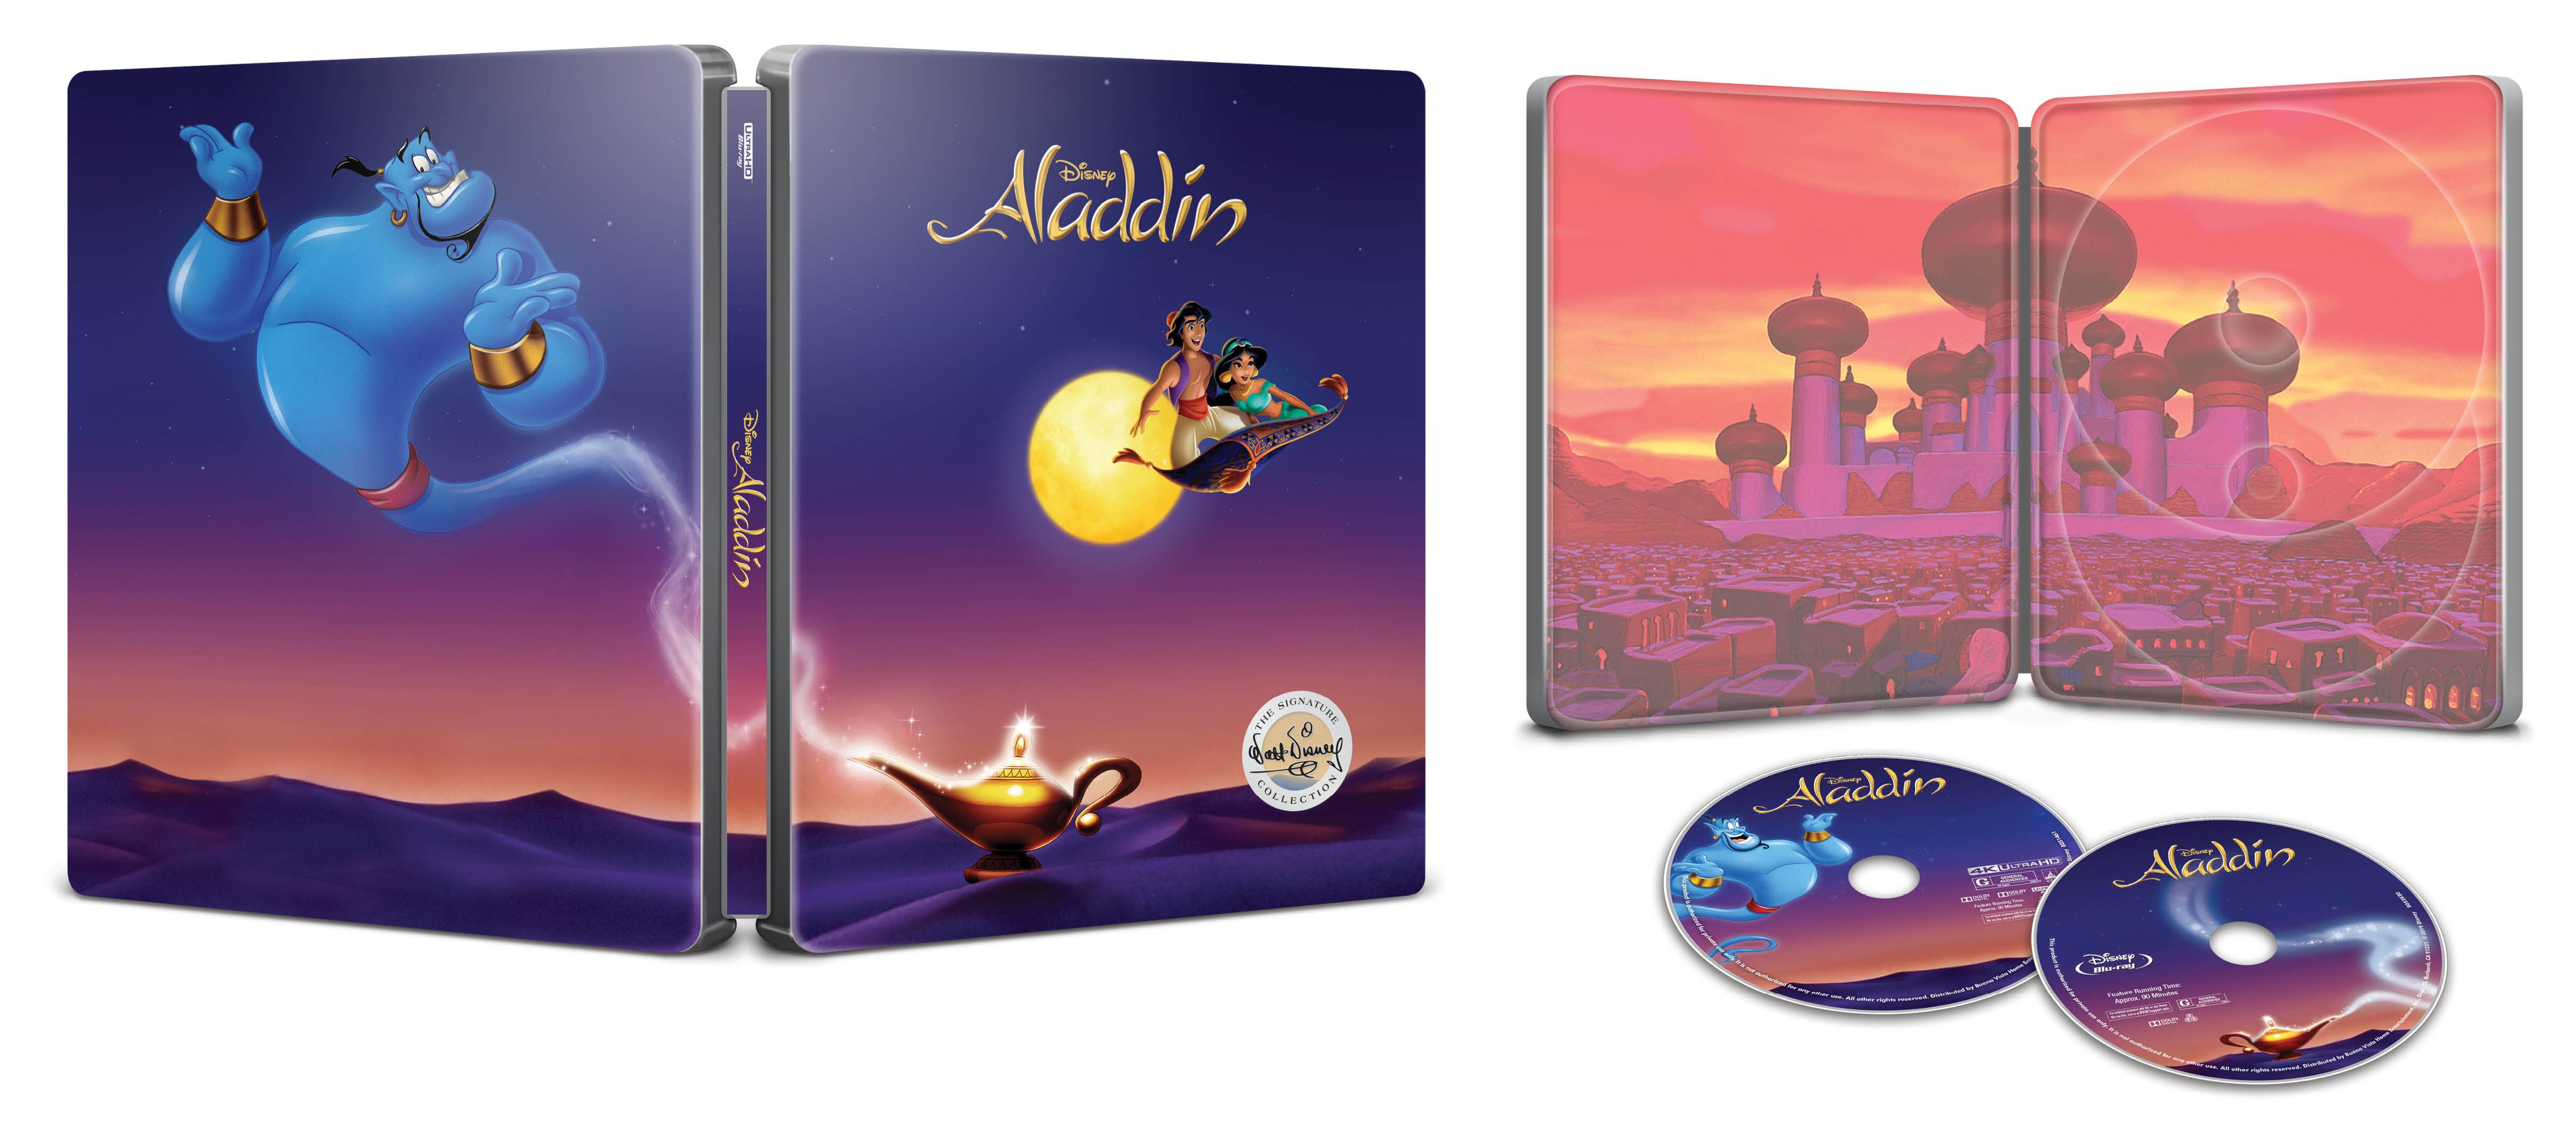 Aladdin Signature Collection Steelbook Dig Copy 4k Ultra Hd Blu Ray Blu Ray Only Best Buy 4k Ultra Hd Blu Ray Blu Ray 1992 Best Buy